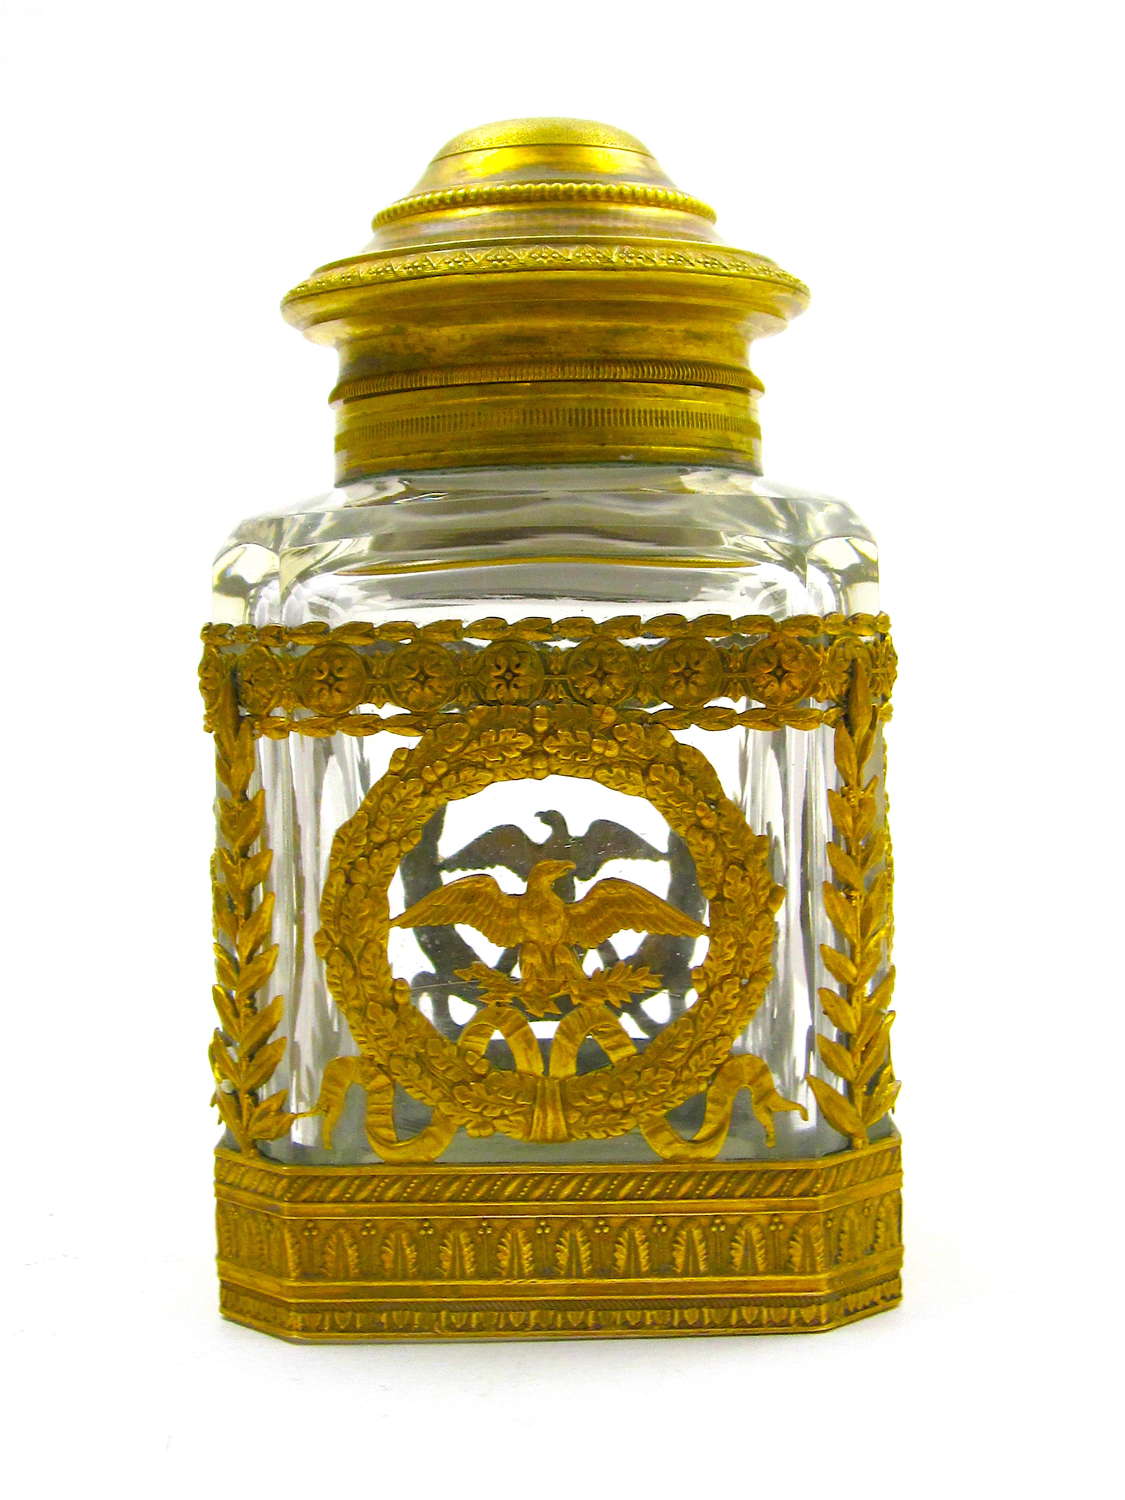 A Large Antique Napoleon III Cut Crystal and Bronze Perfume Bottle